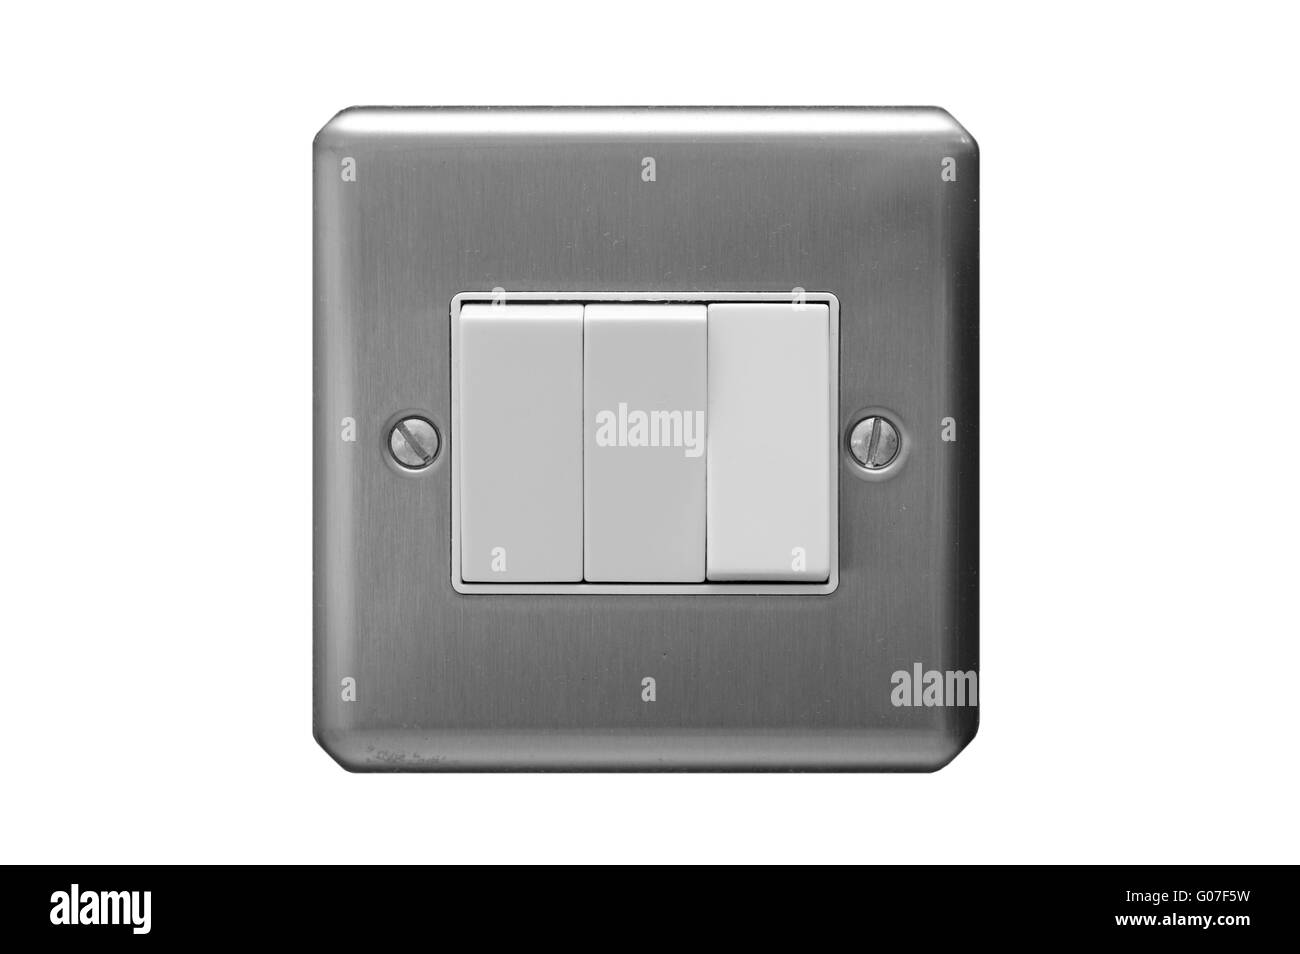 Light switch with three buttons Stock Photo